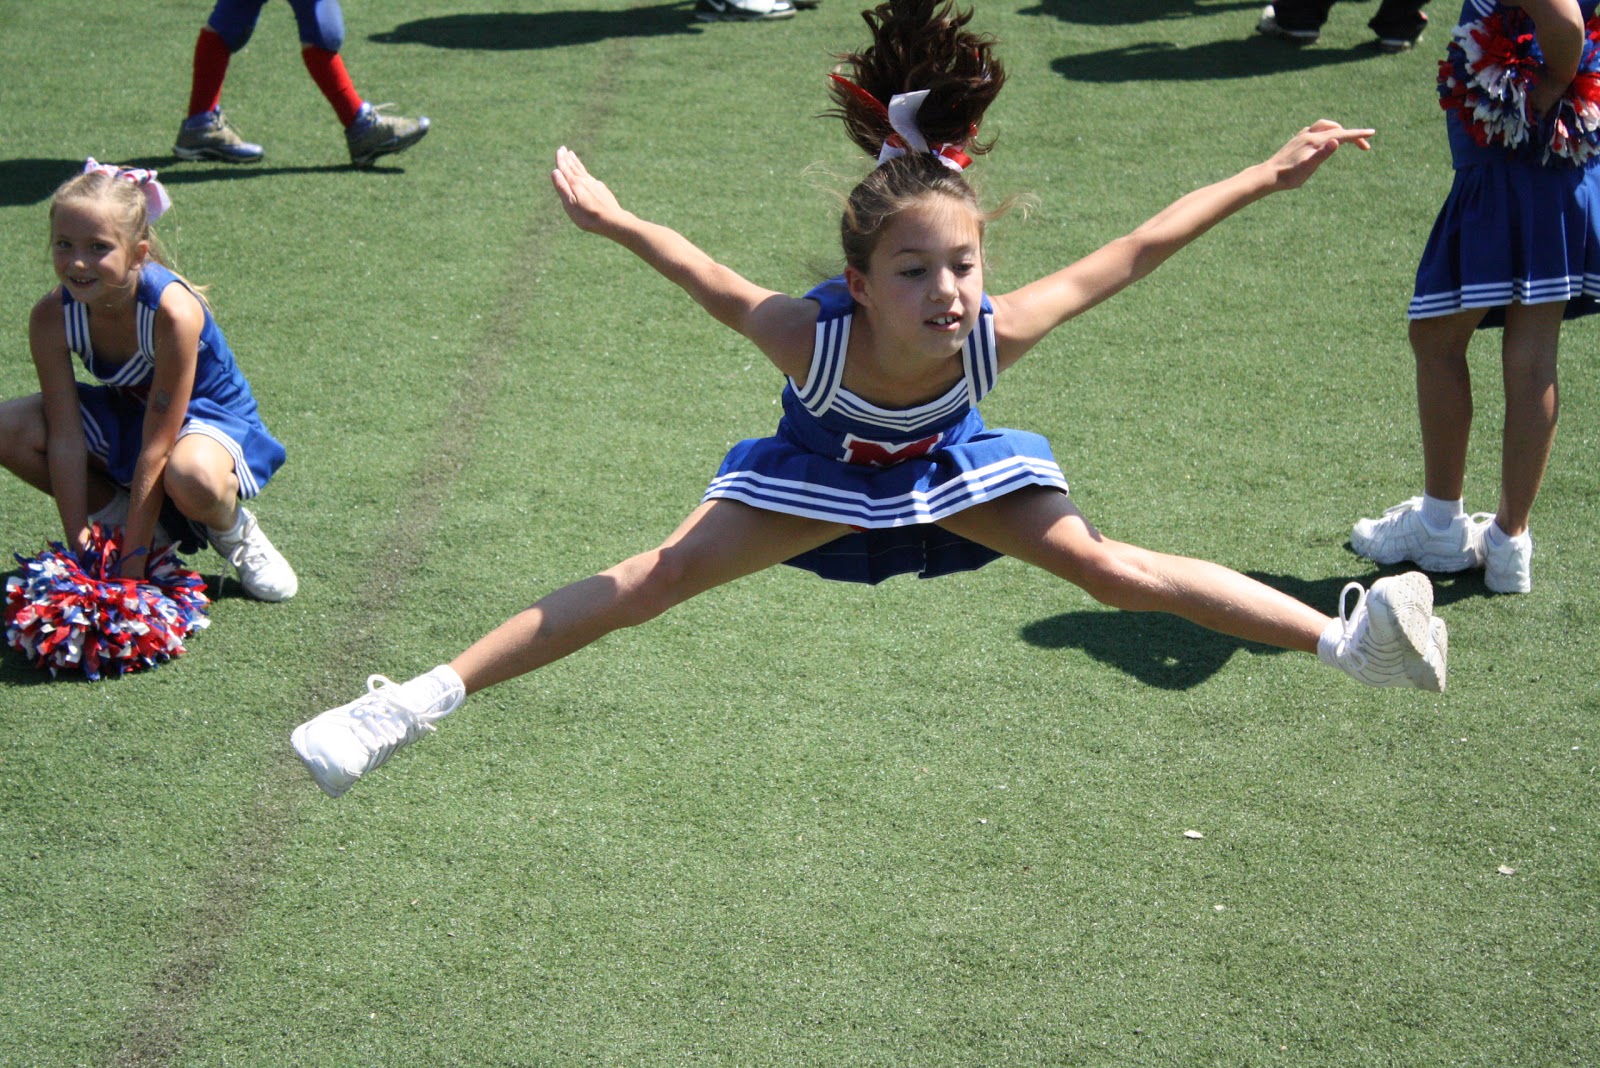 Mariah is in her second season of cheerleading and she absolutely LOVES it!...